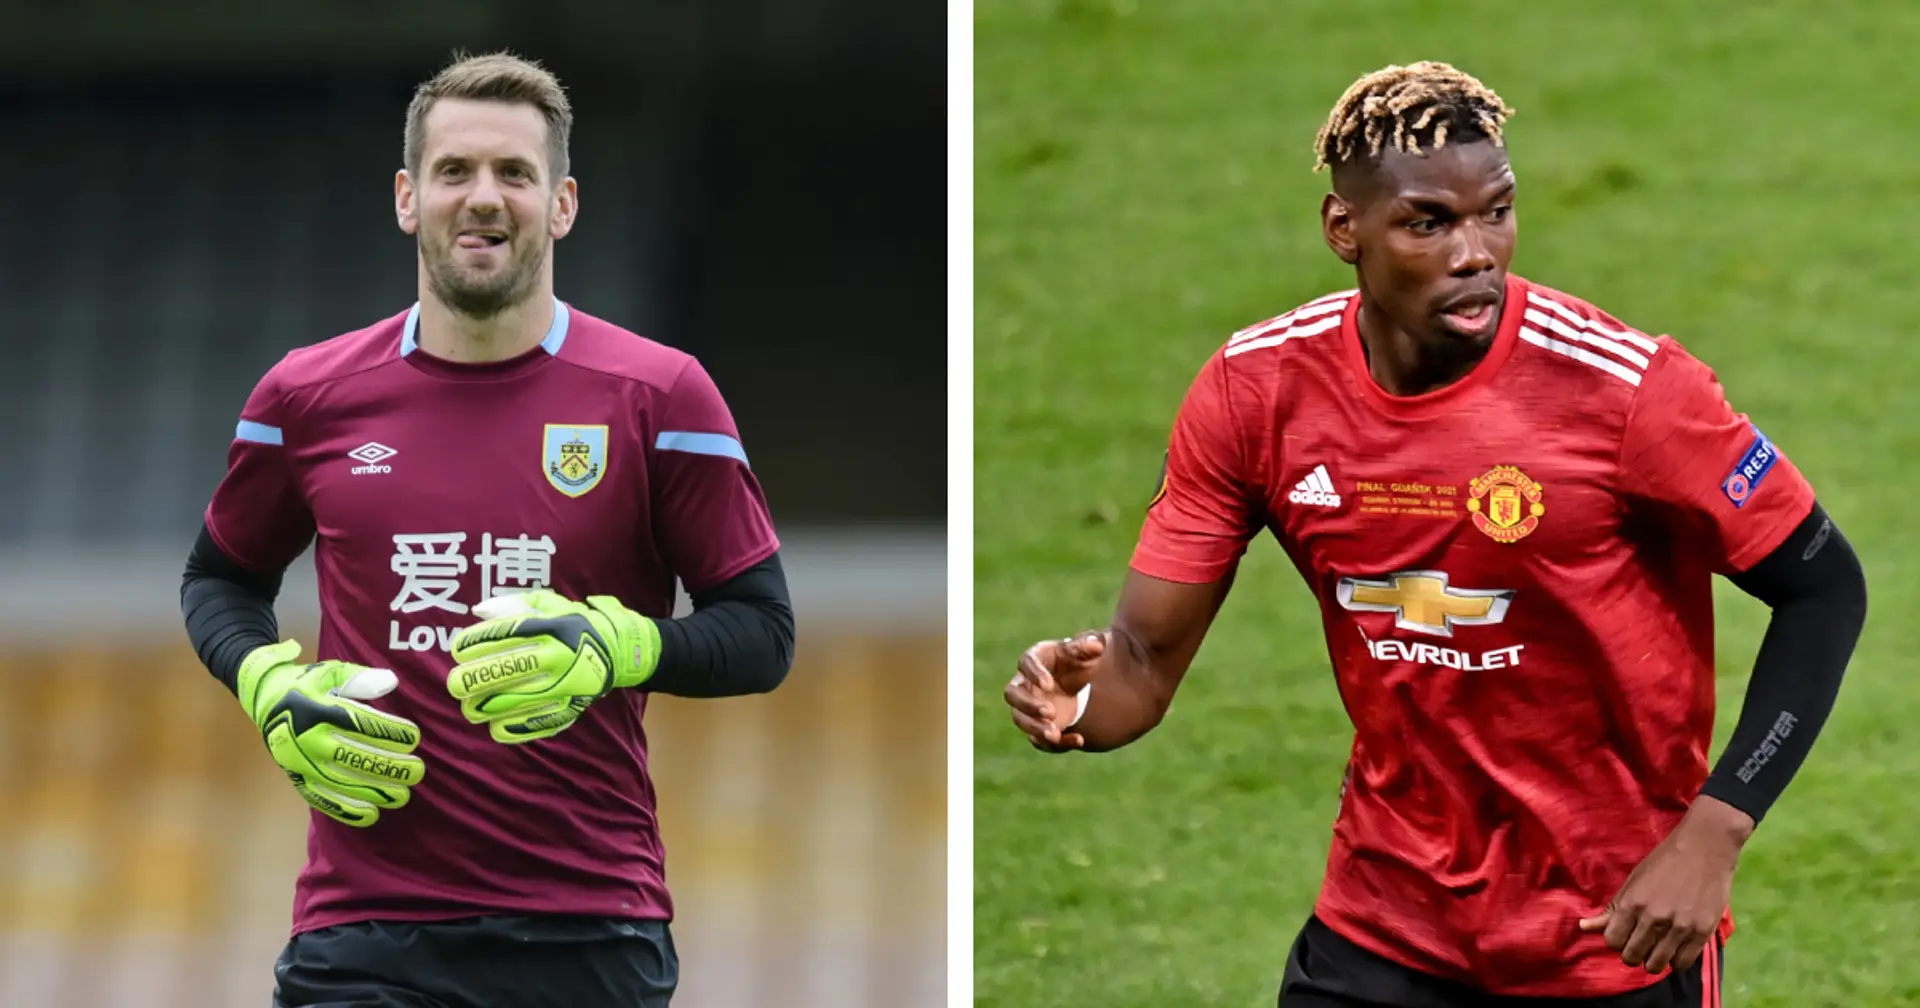 Heaton to sign, update on Pogba: latest Man United transfer round-up with probability ratings